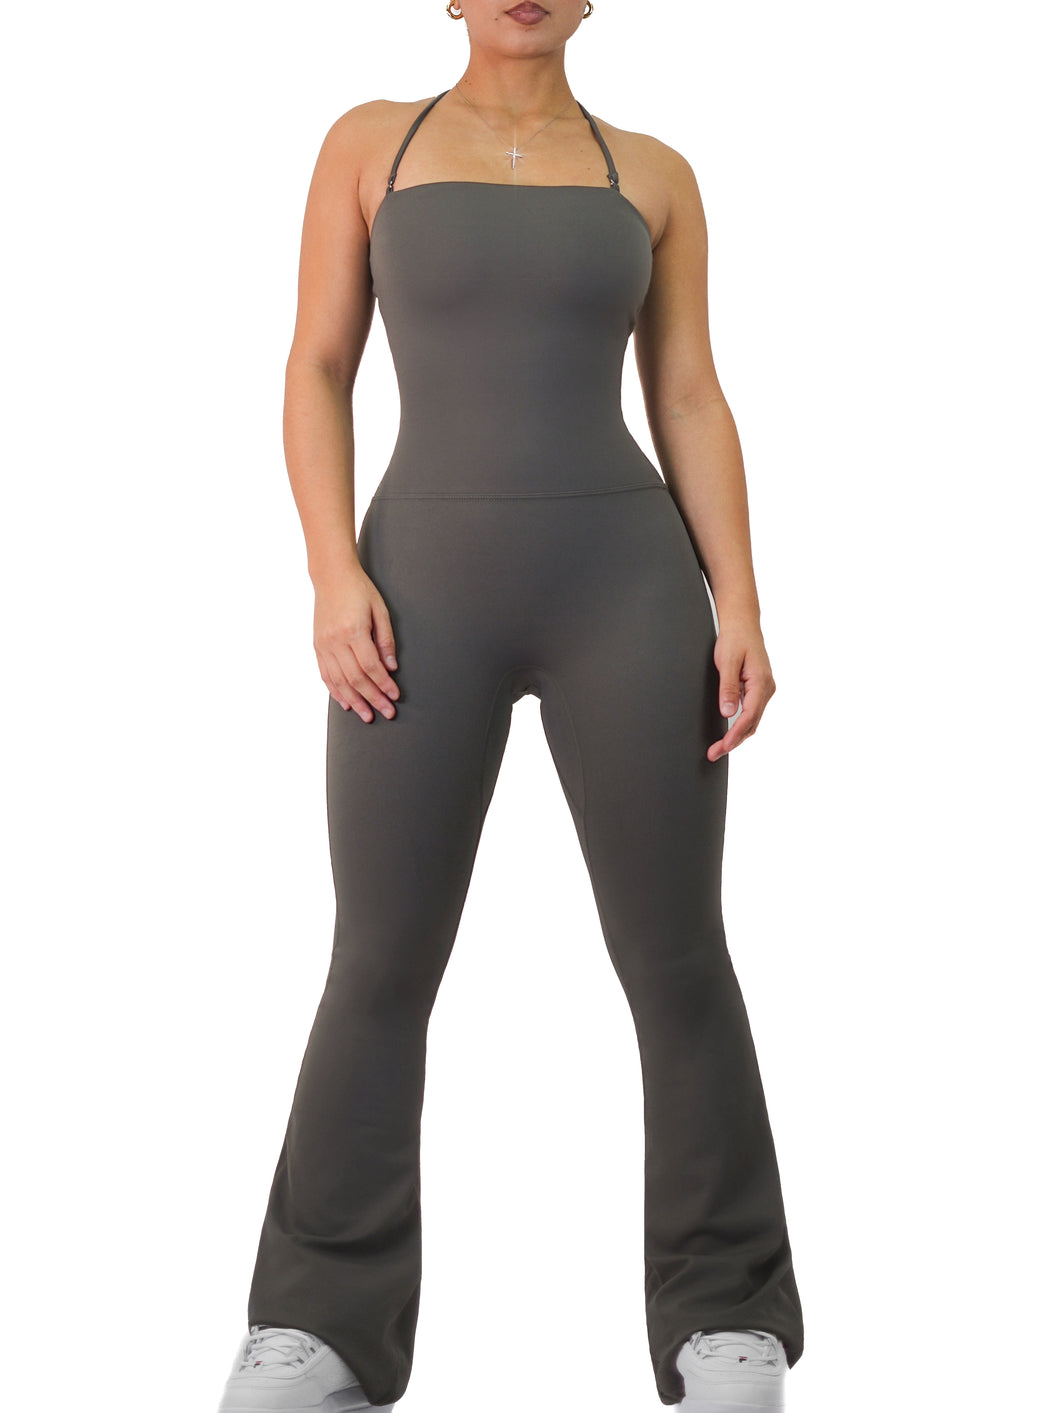 Strapless Flare Jumpsuit (Charcoal)